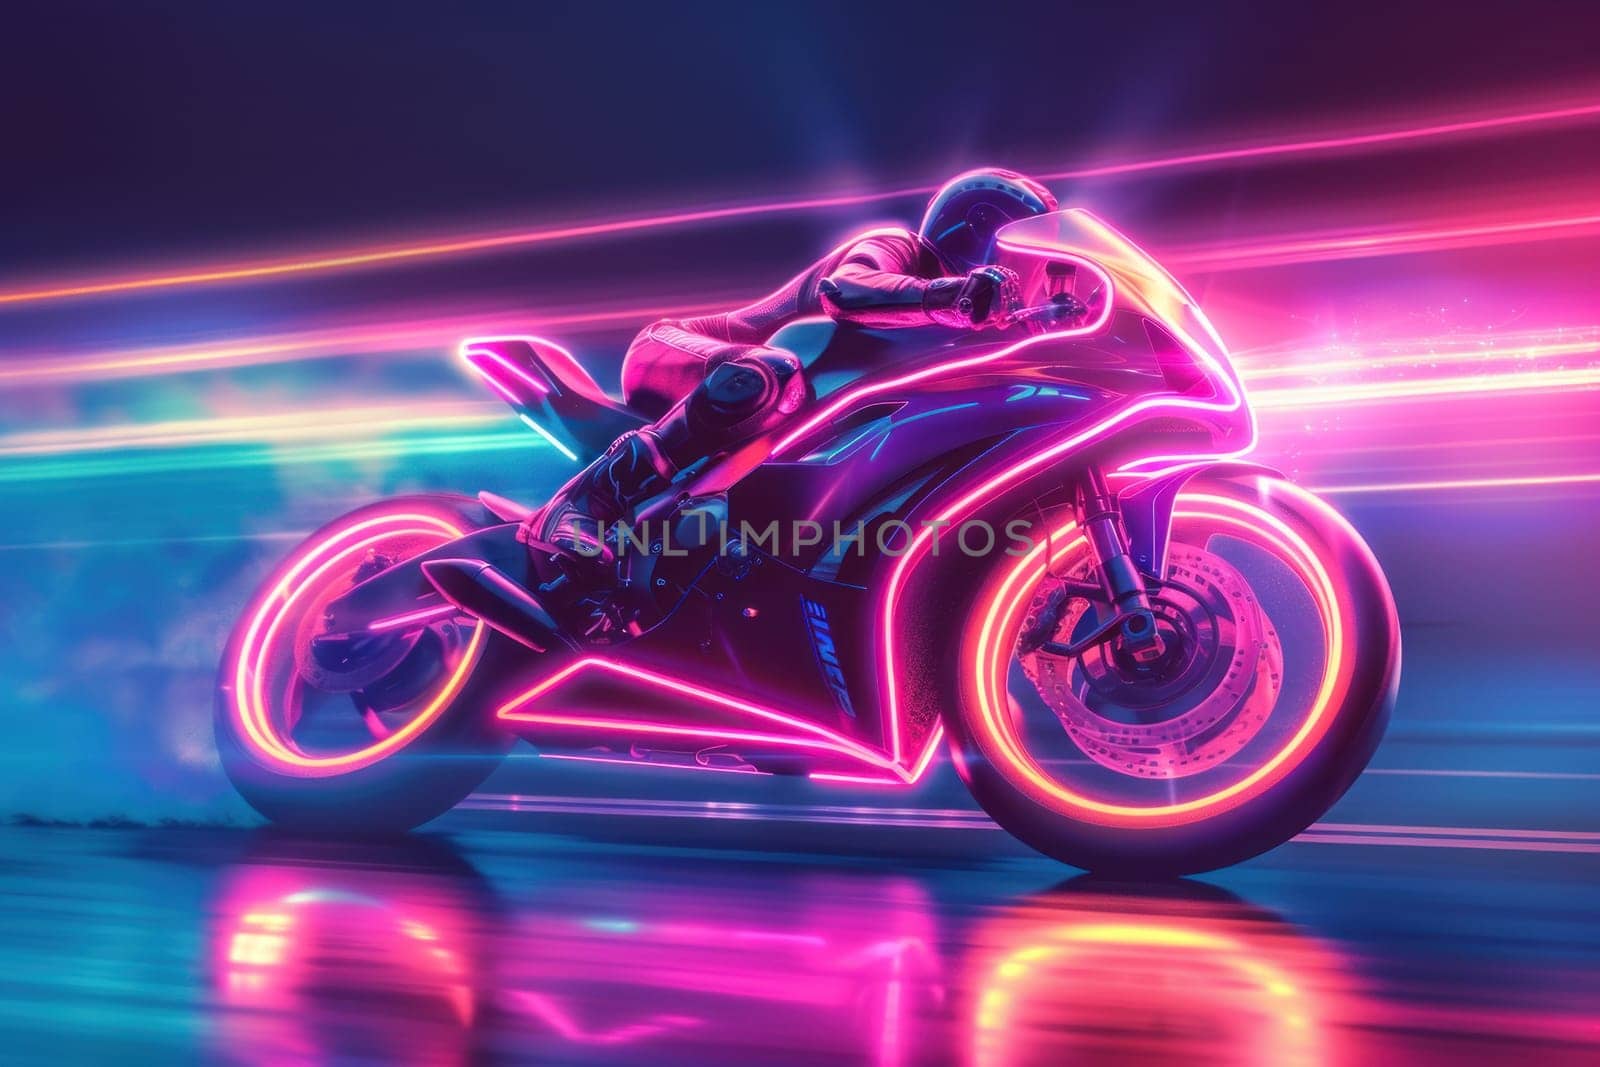 A neon bike is shown in a neon color with a man on it by golfmerrymaker